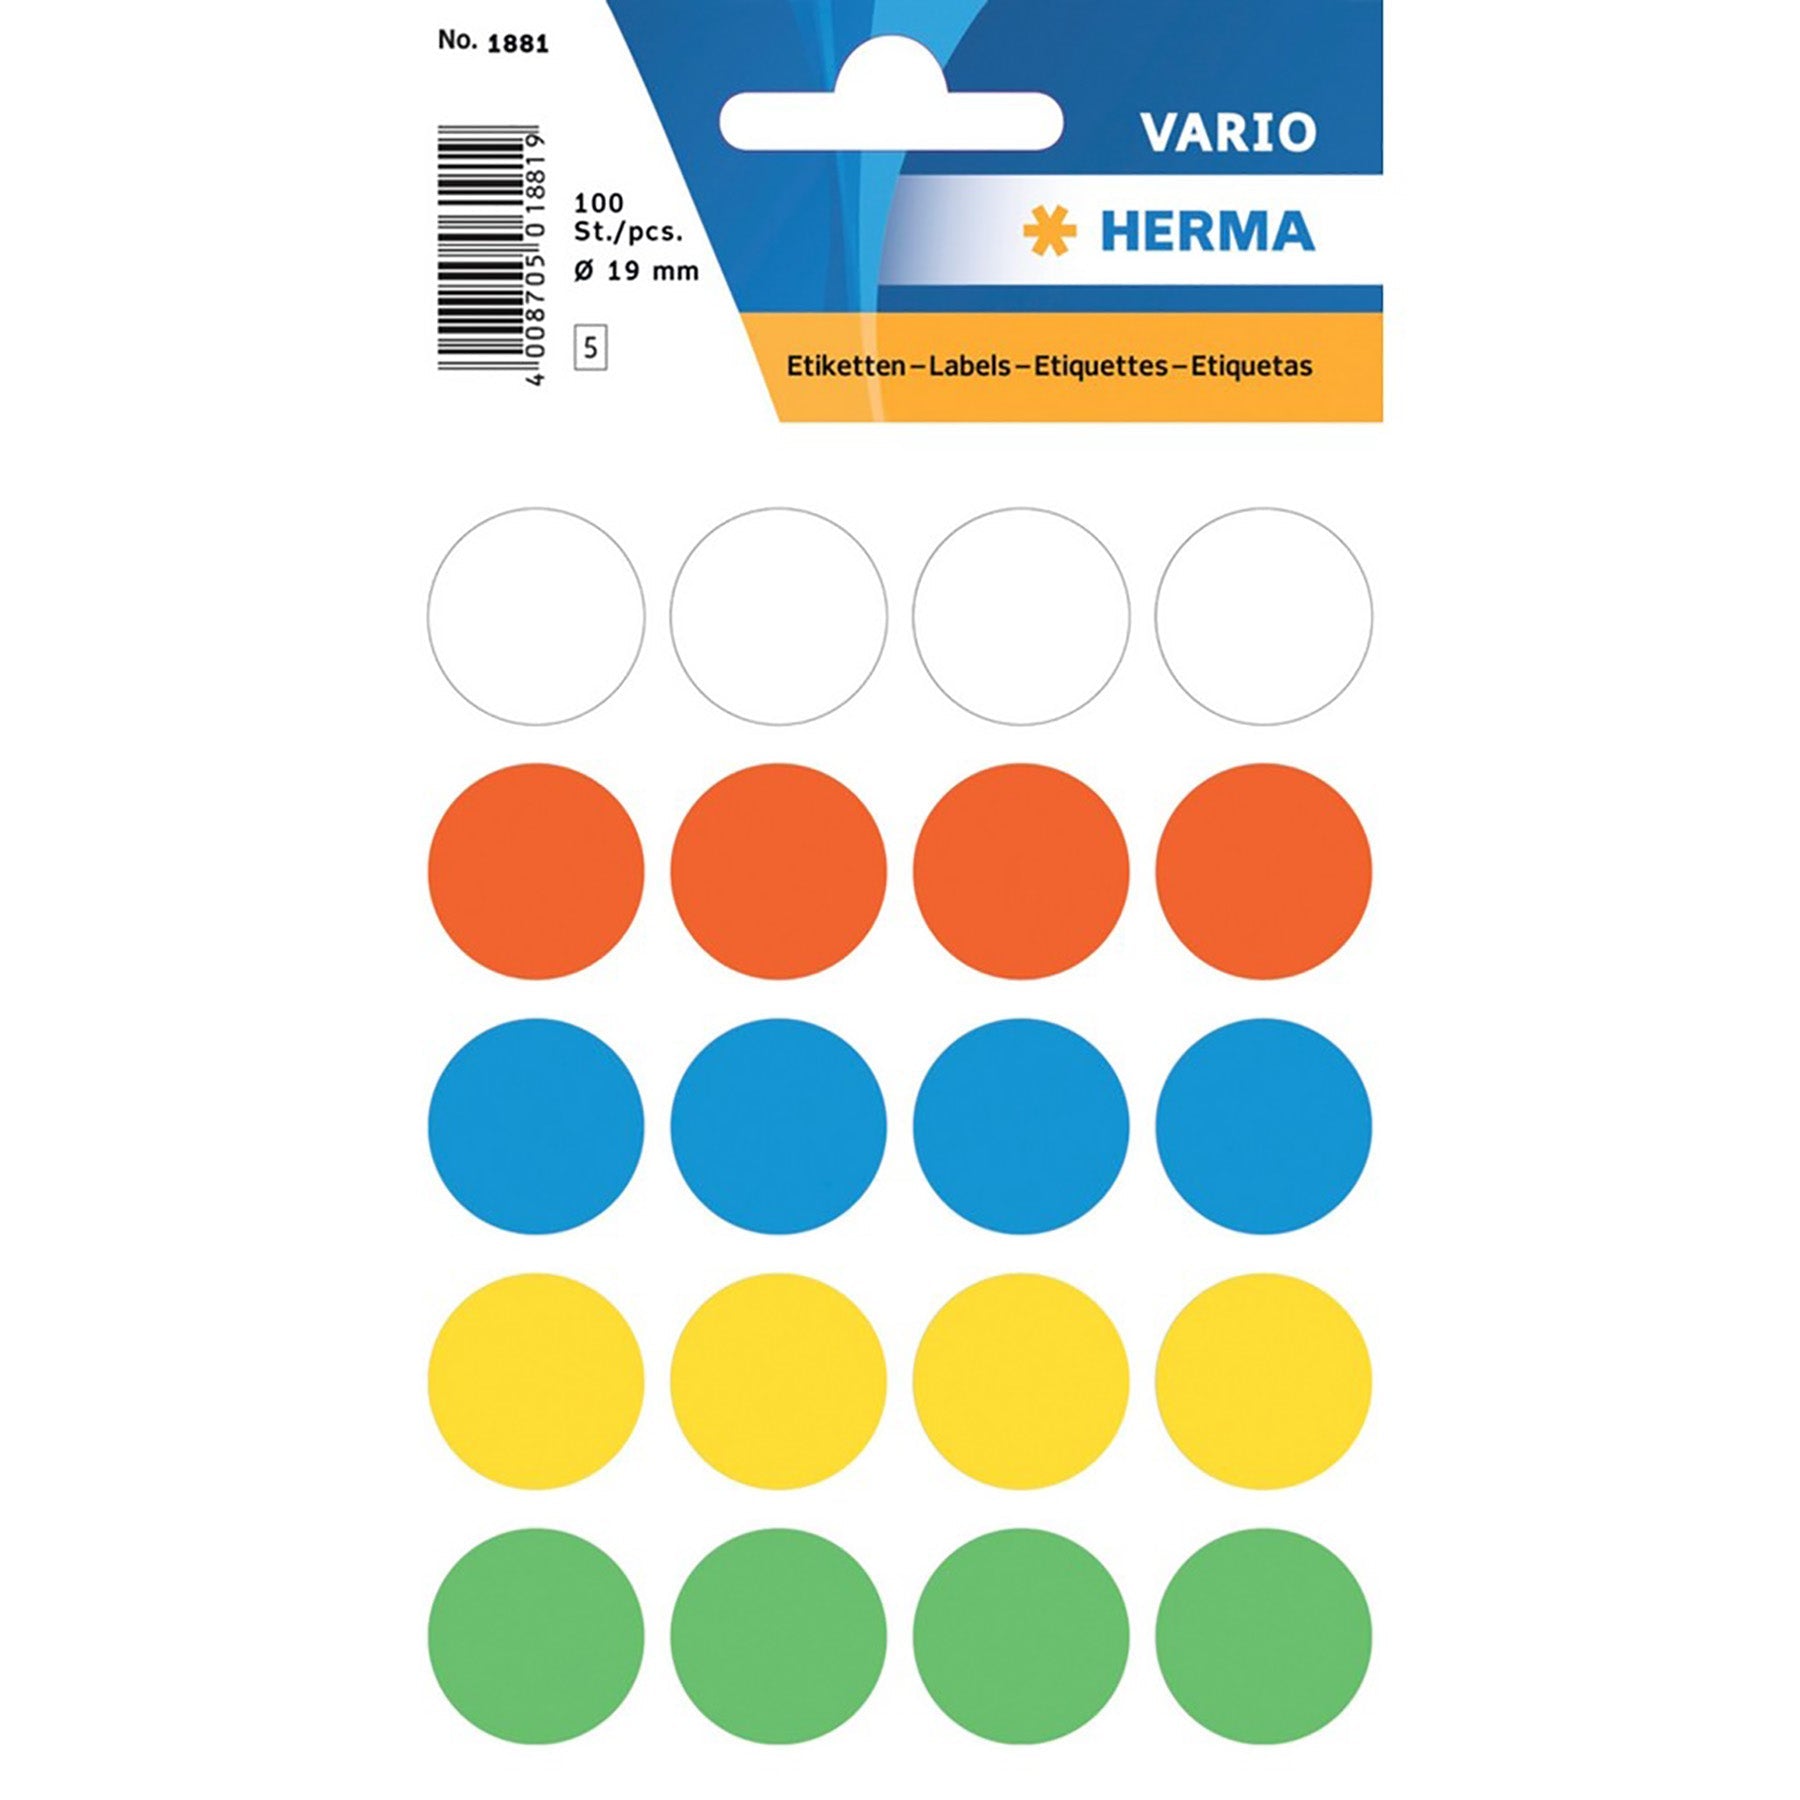 Herma Vario 5 Sheets Colour-Coding Round Labels Dots, Assorted 0.75in